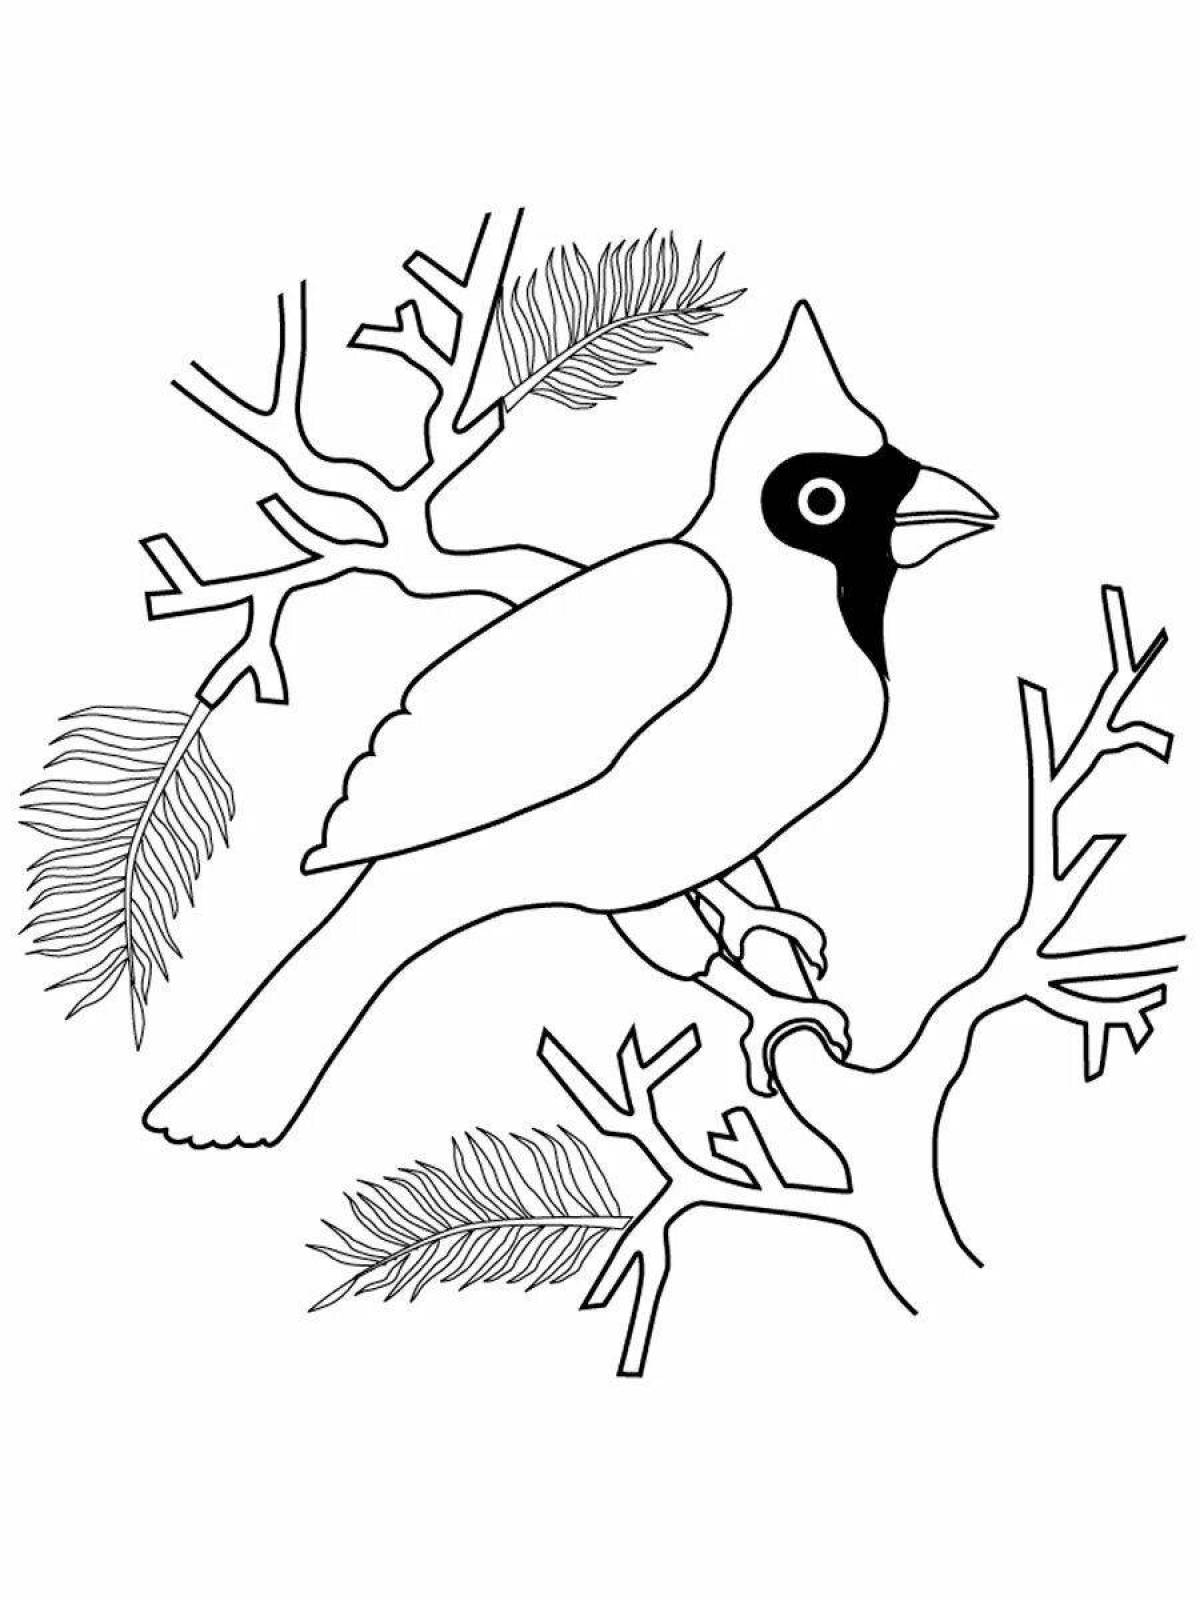 Violent winter birds coloring for children 6-7 years old